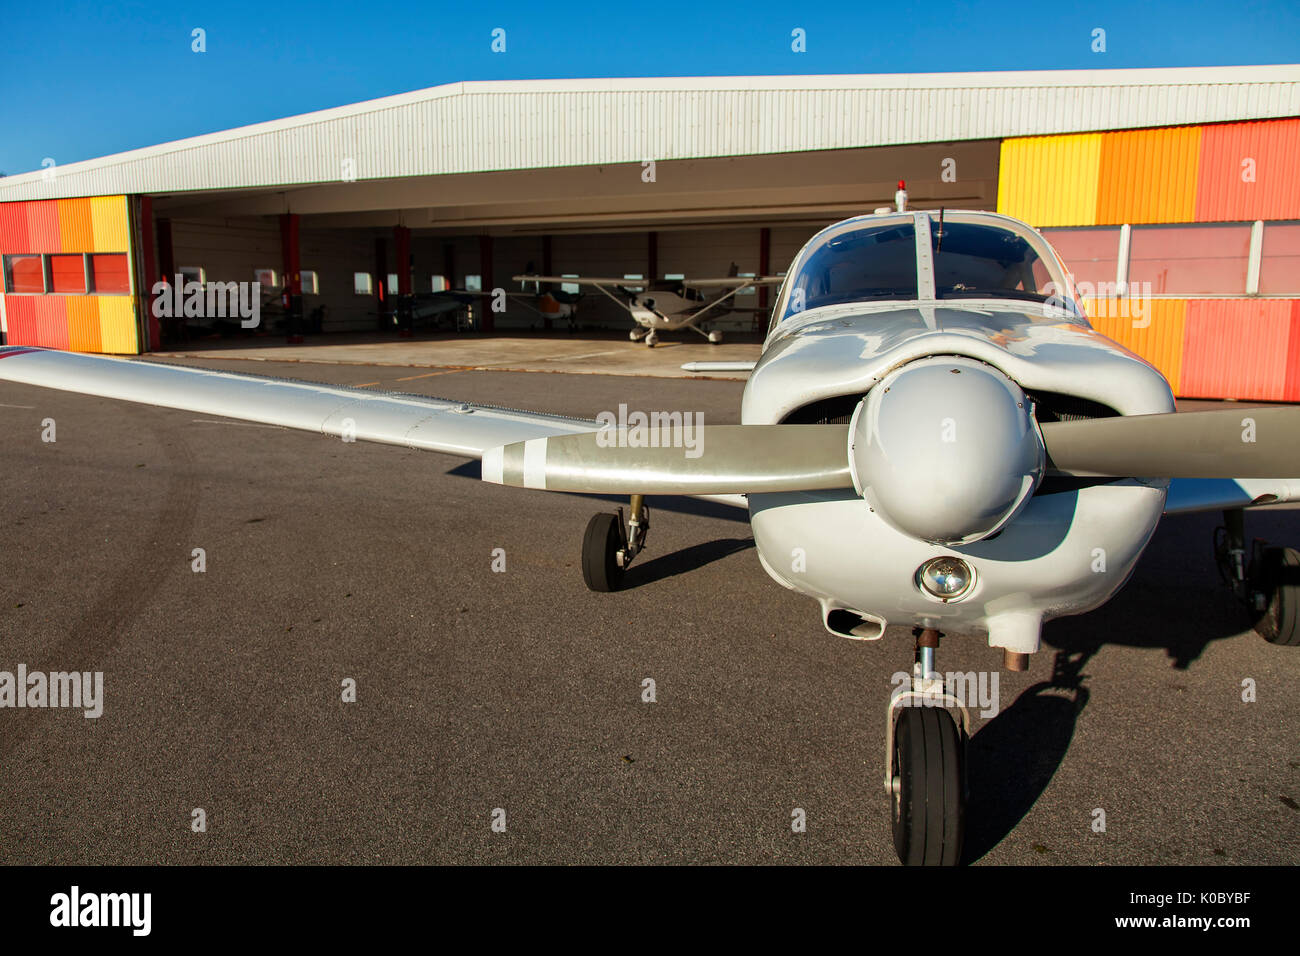 Image of small private air-planes Stock Photo